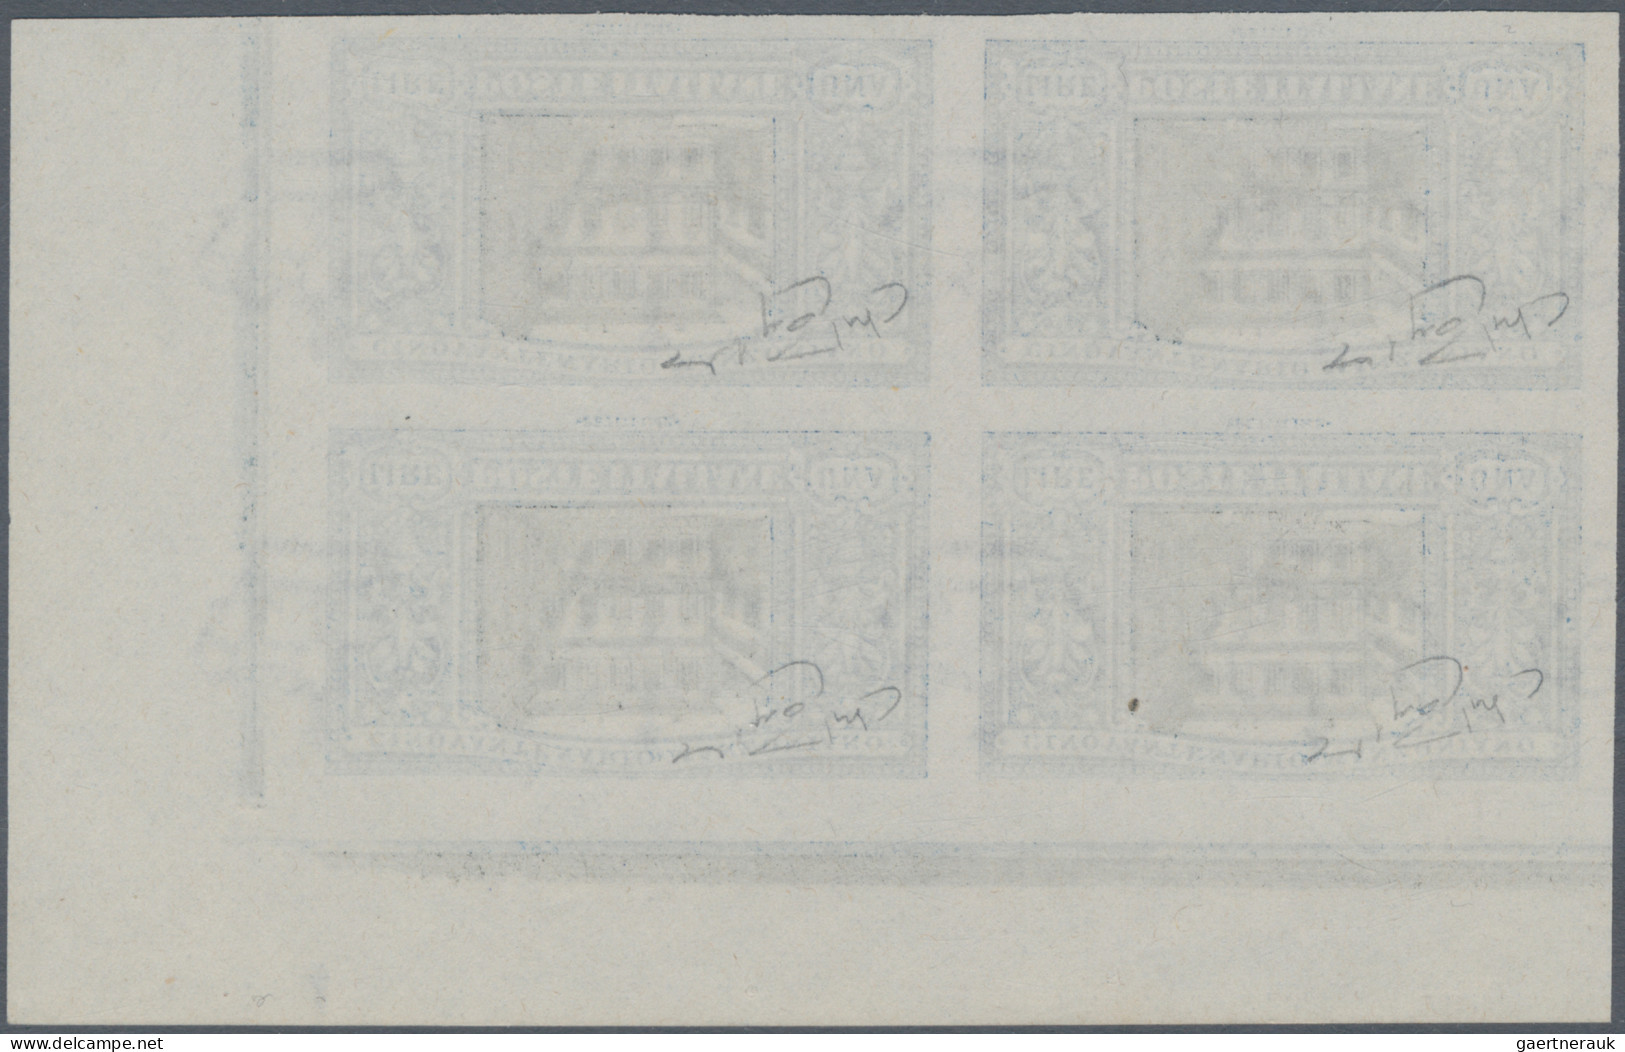 Italy: 1923, 1 L Manzoni, Mint Without Gum, IMPERFORATE Block Of Four With Sheet - Neufs